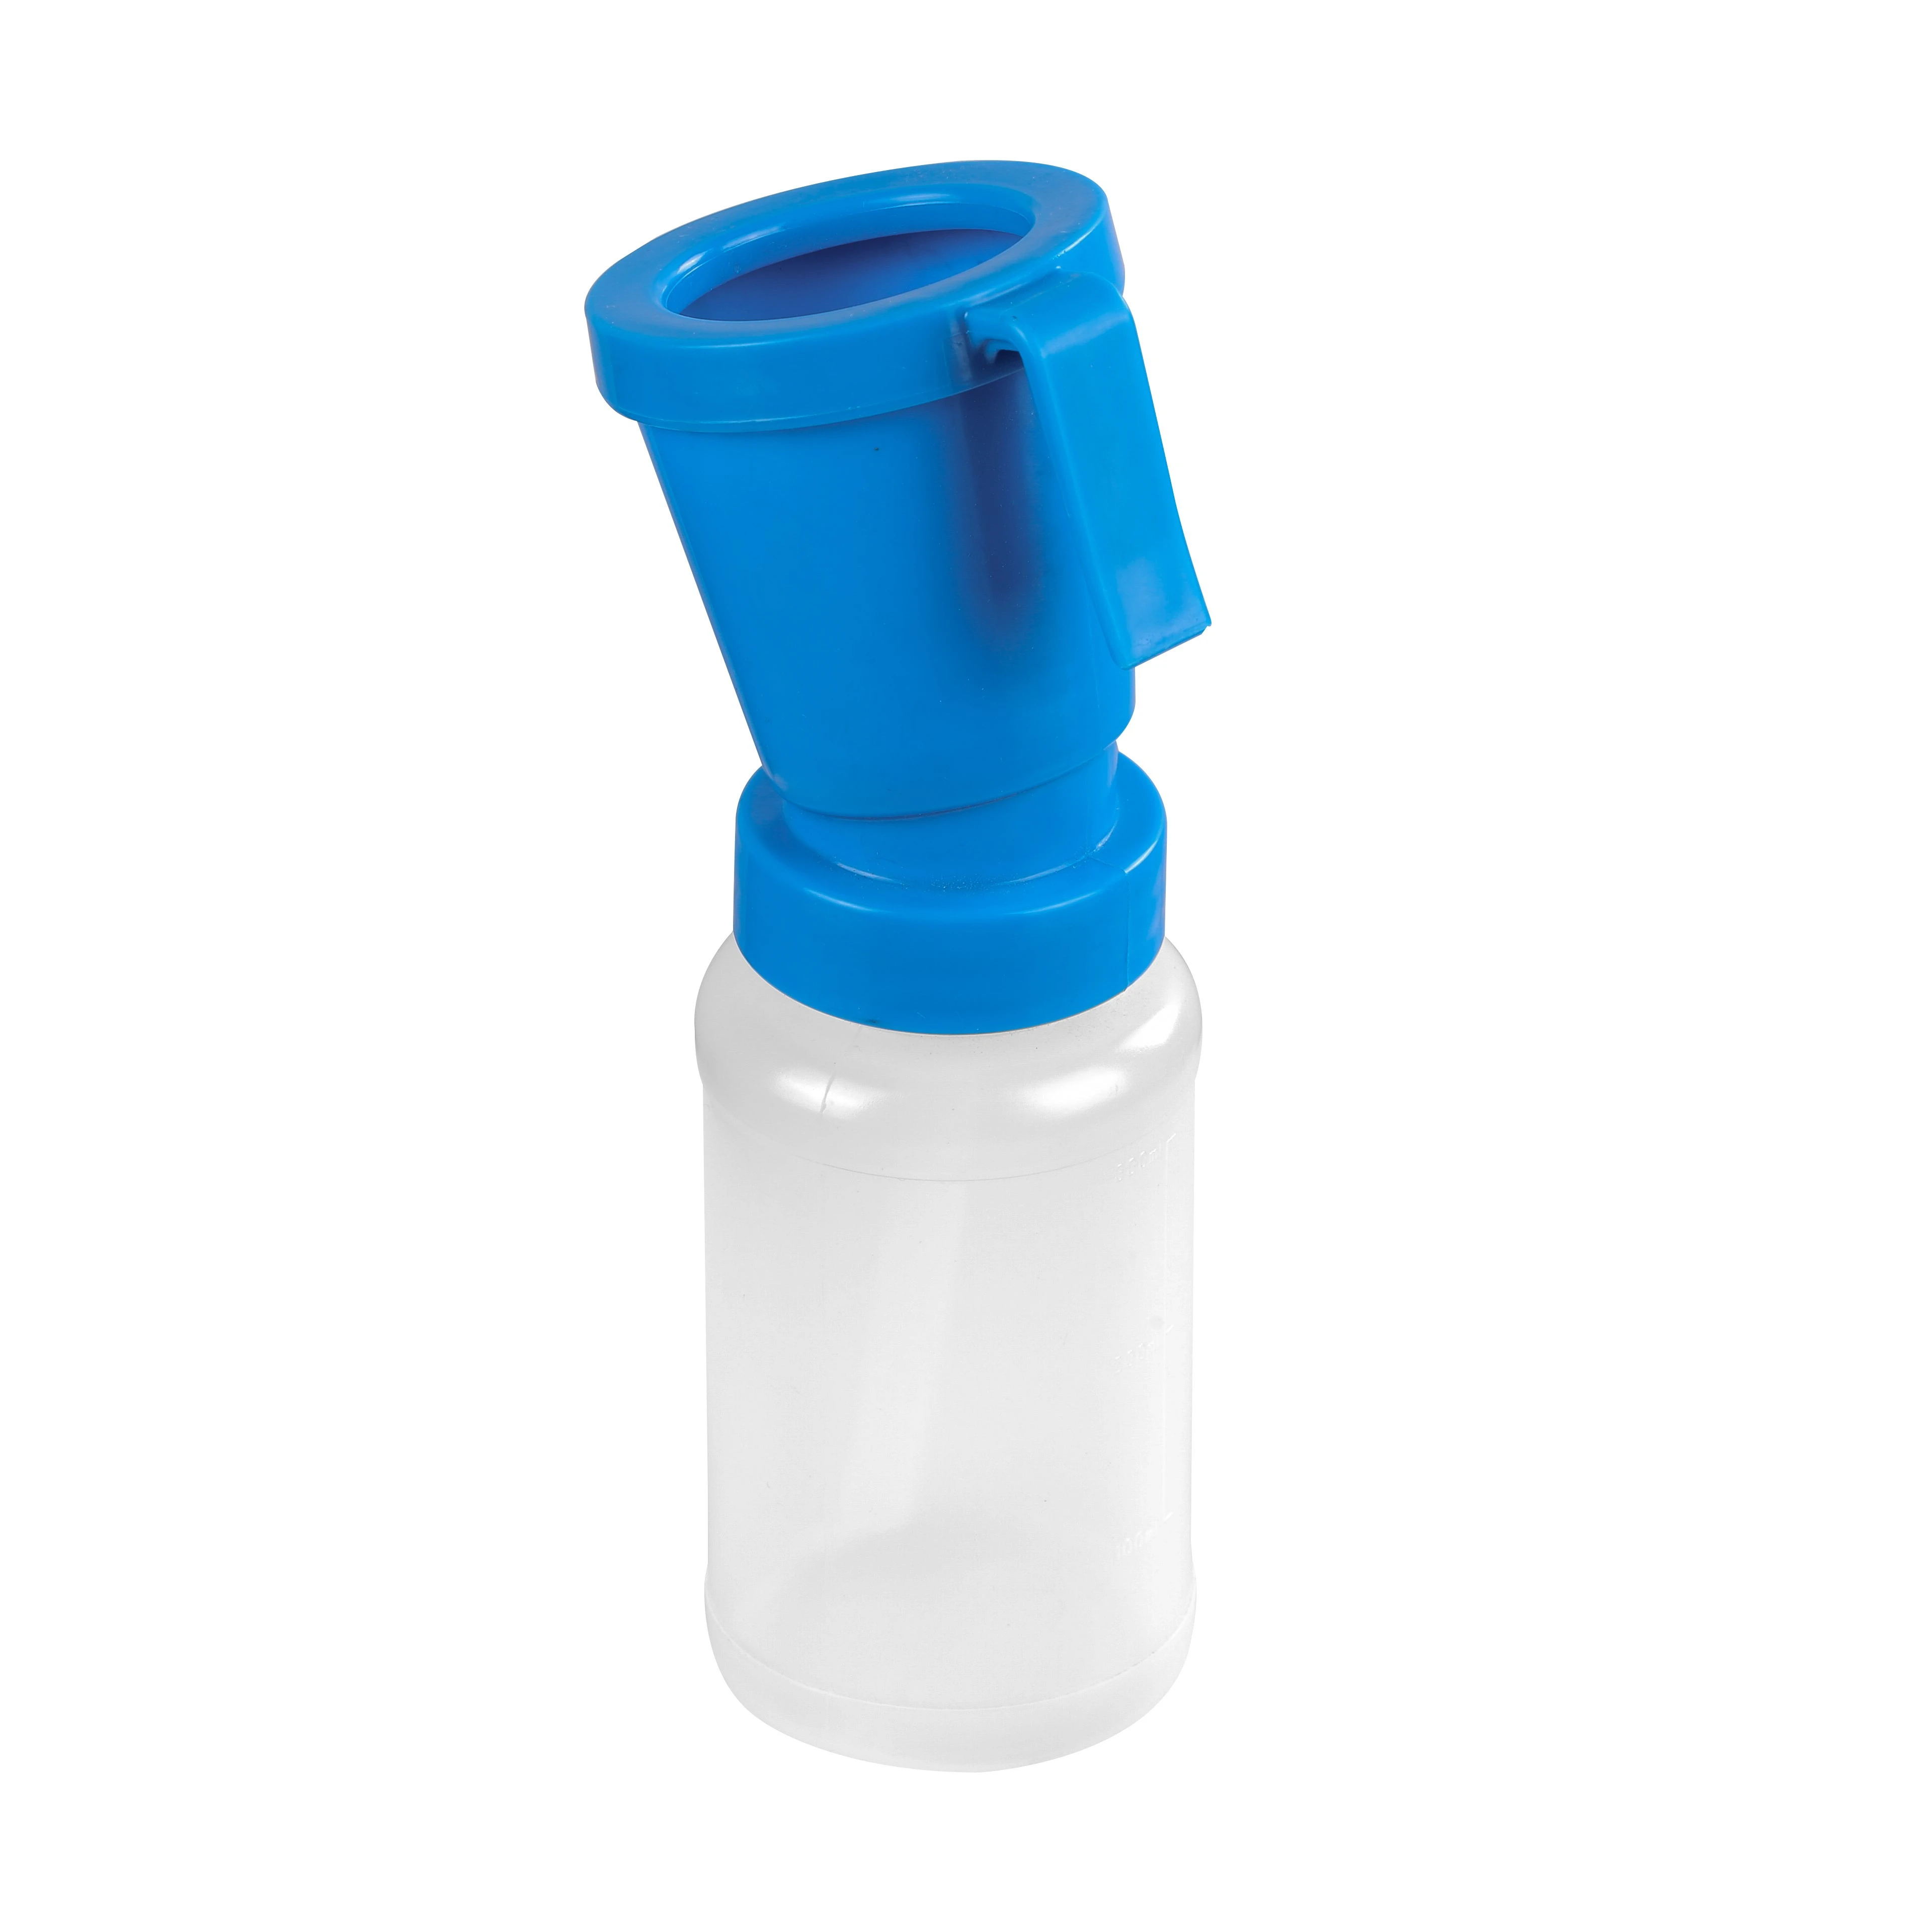 300ml Non-return Type Plastic Teat Dip Cup for Cow Nipple Dipping and Cleaning VTN002